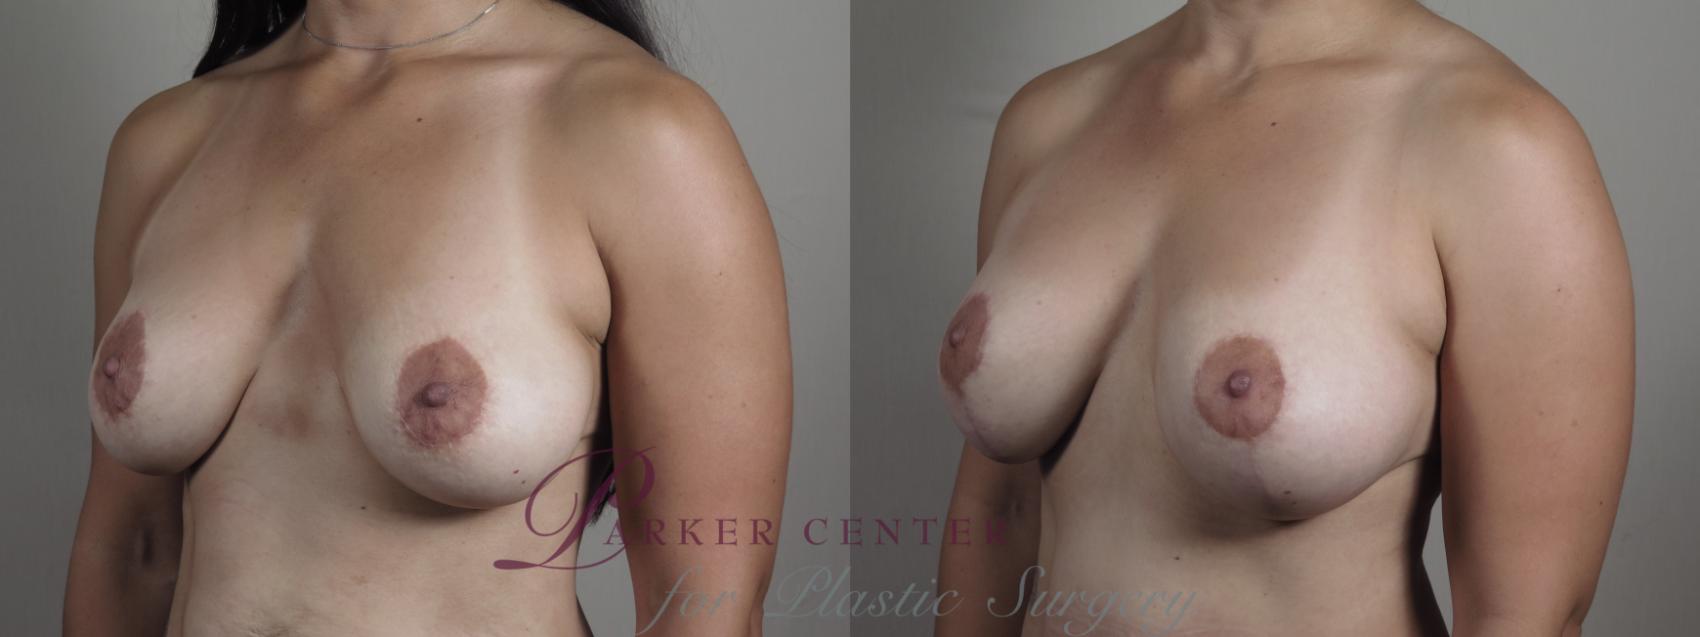 Tummy Tuck Case 975 Before & After right 3/4 b view 2 | Paramus, NJ | Parker Center for Plastic Surgery